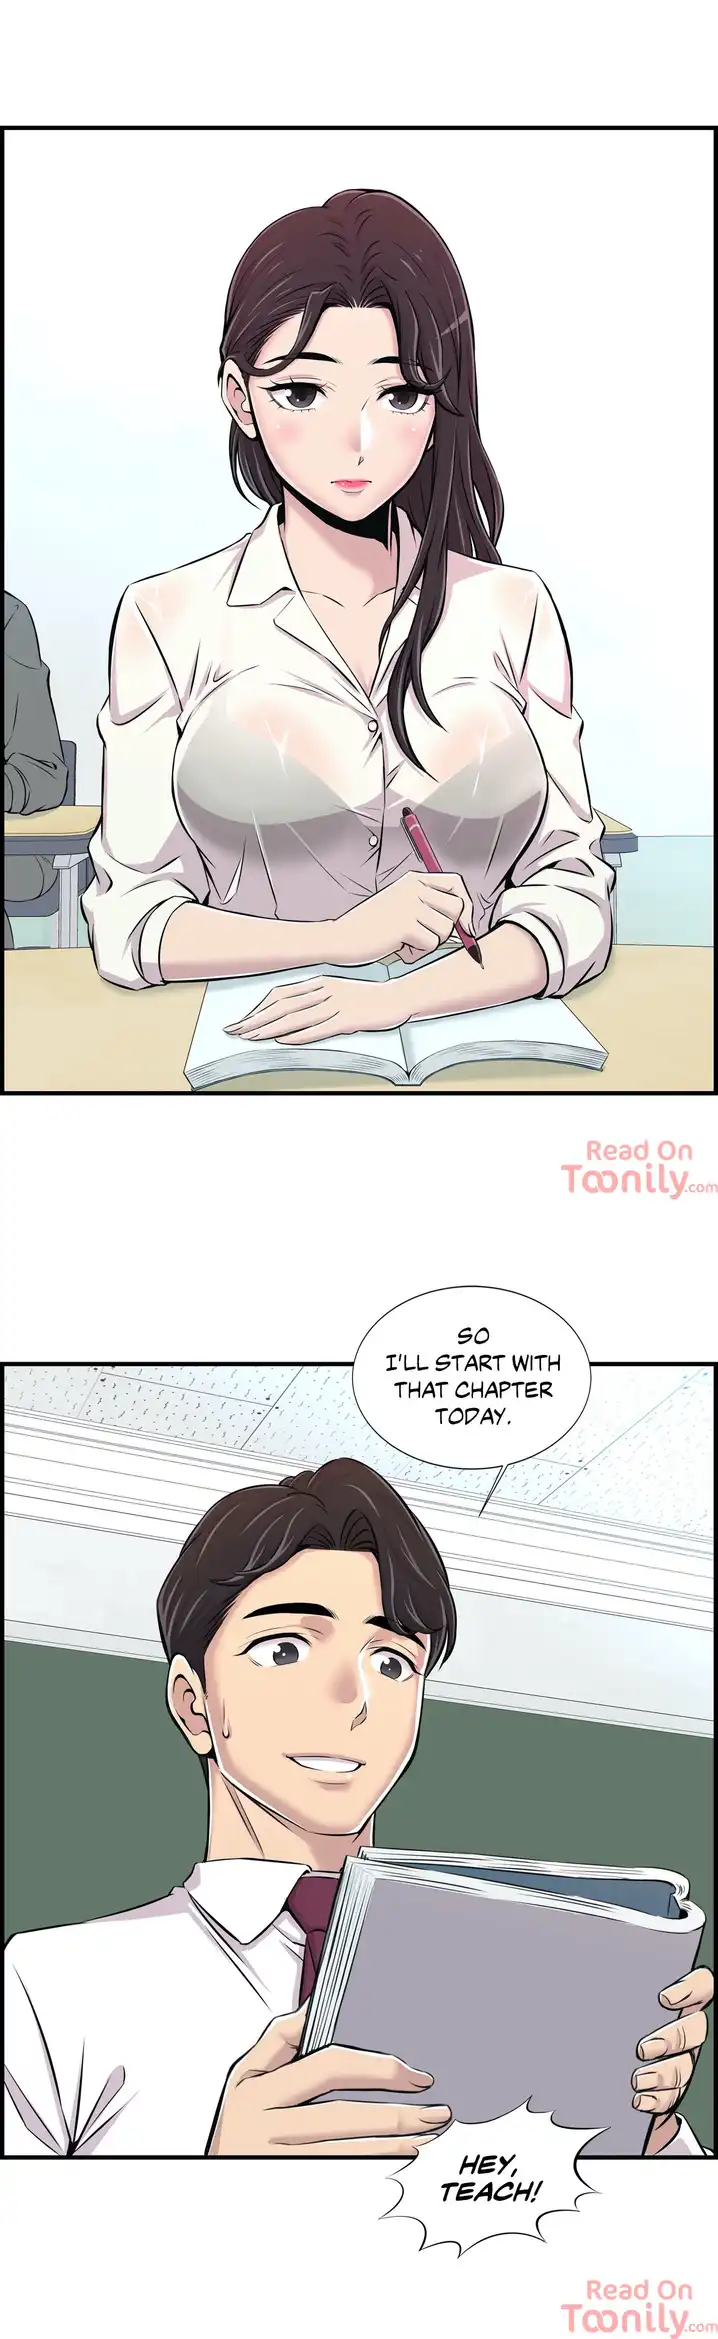 Cram School Scandal - Chapter 1 Page 31